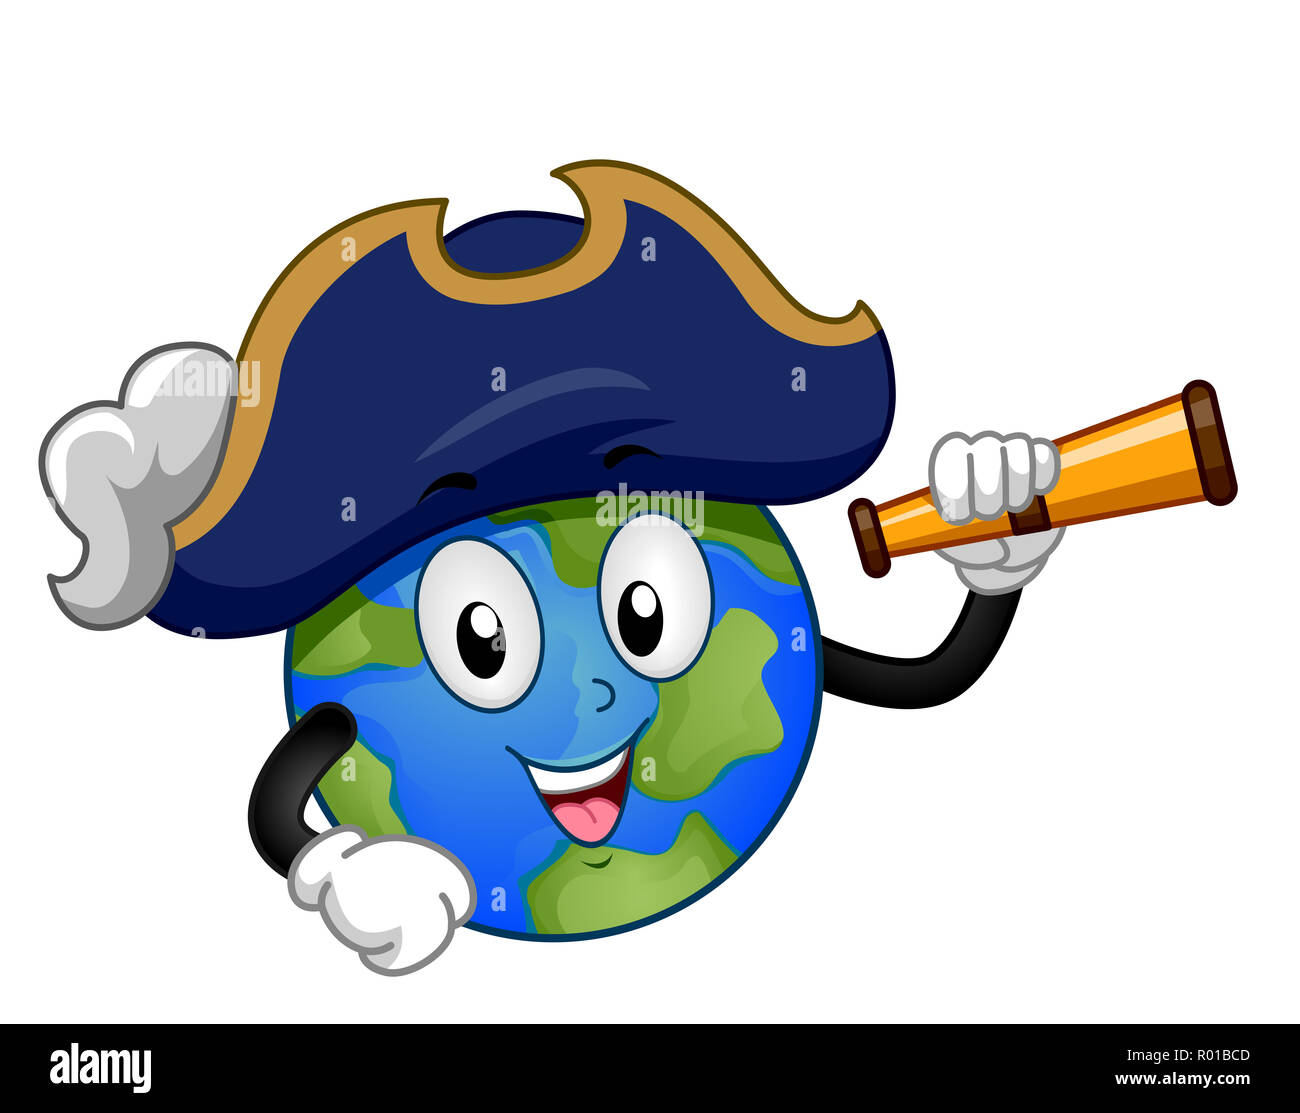 Illustration of an Earth Mascot Wearing a Pirate Captain Hat and Holding a Hand Telescope Stock Photo